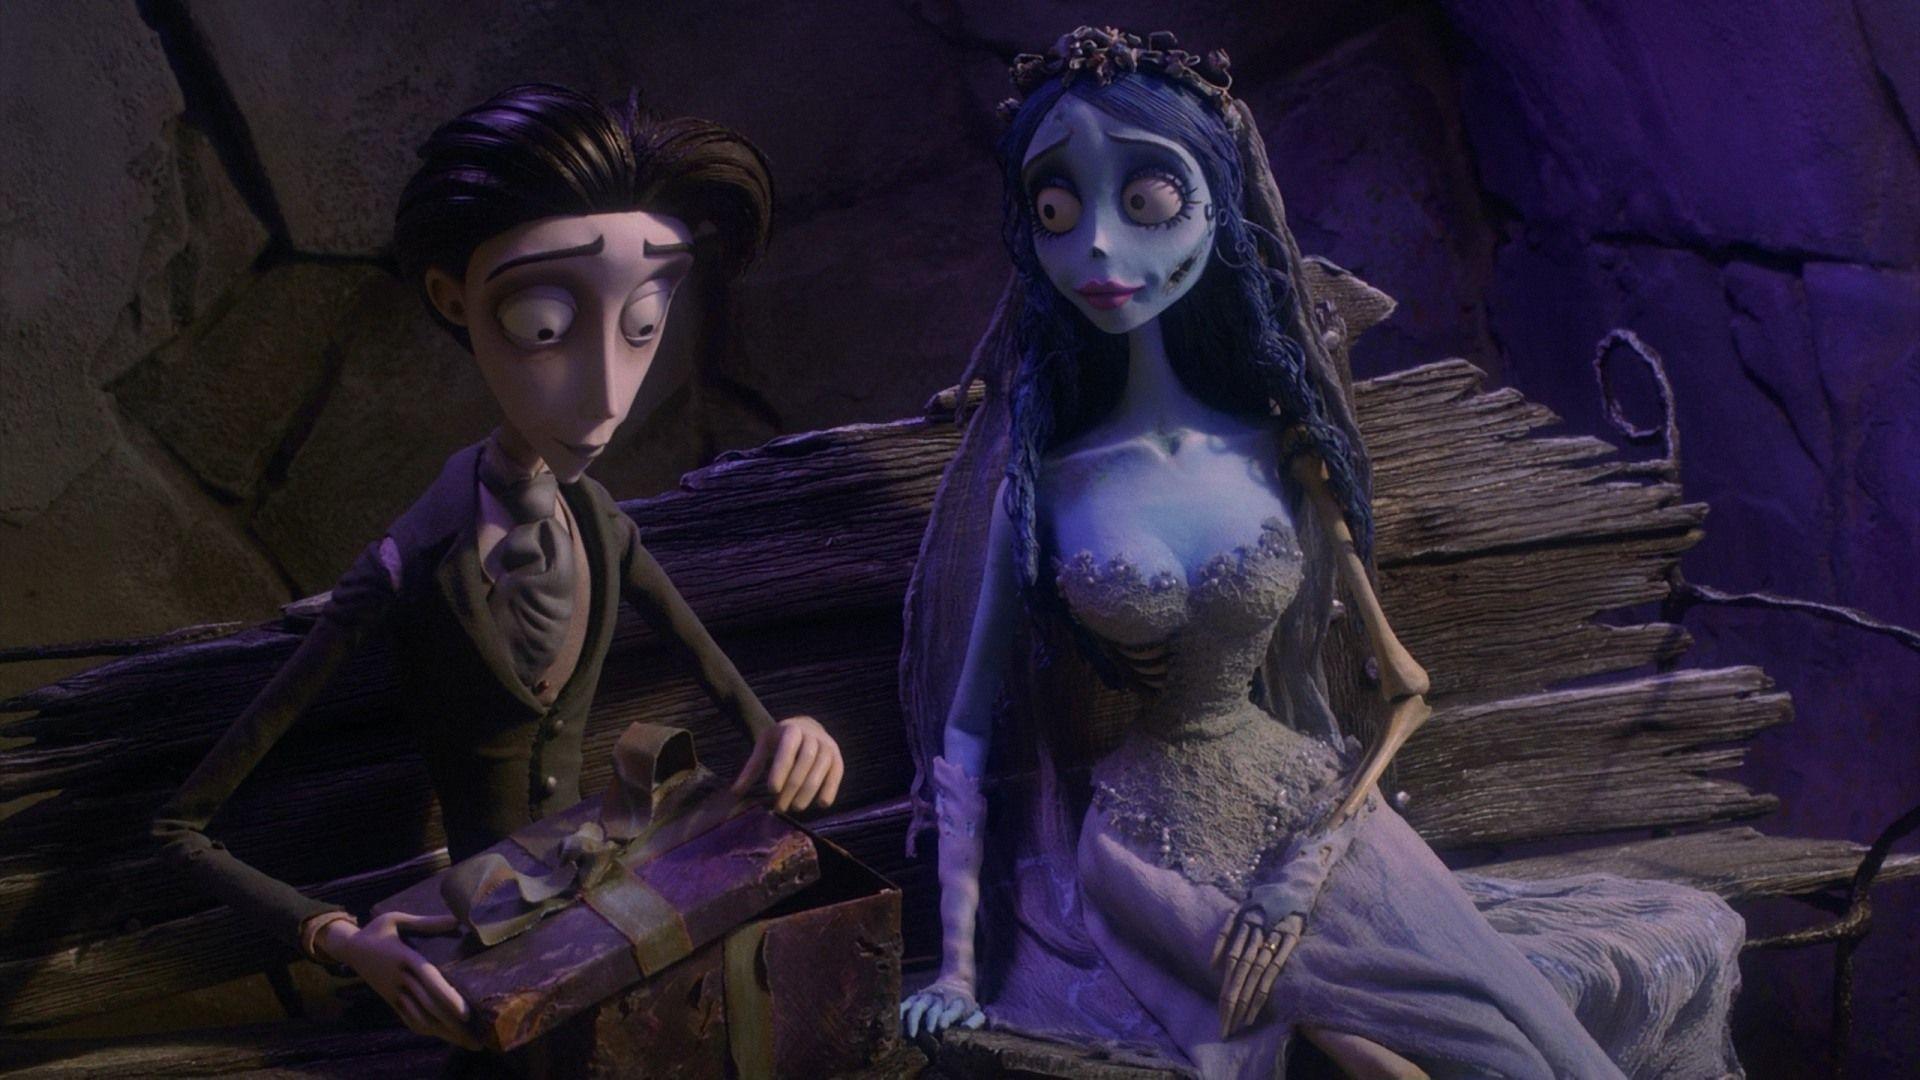 Corpse Bride Wallpaper High Quality 18152 HD Picture. Best